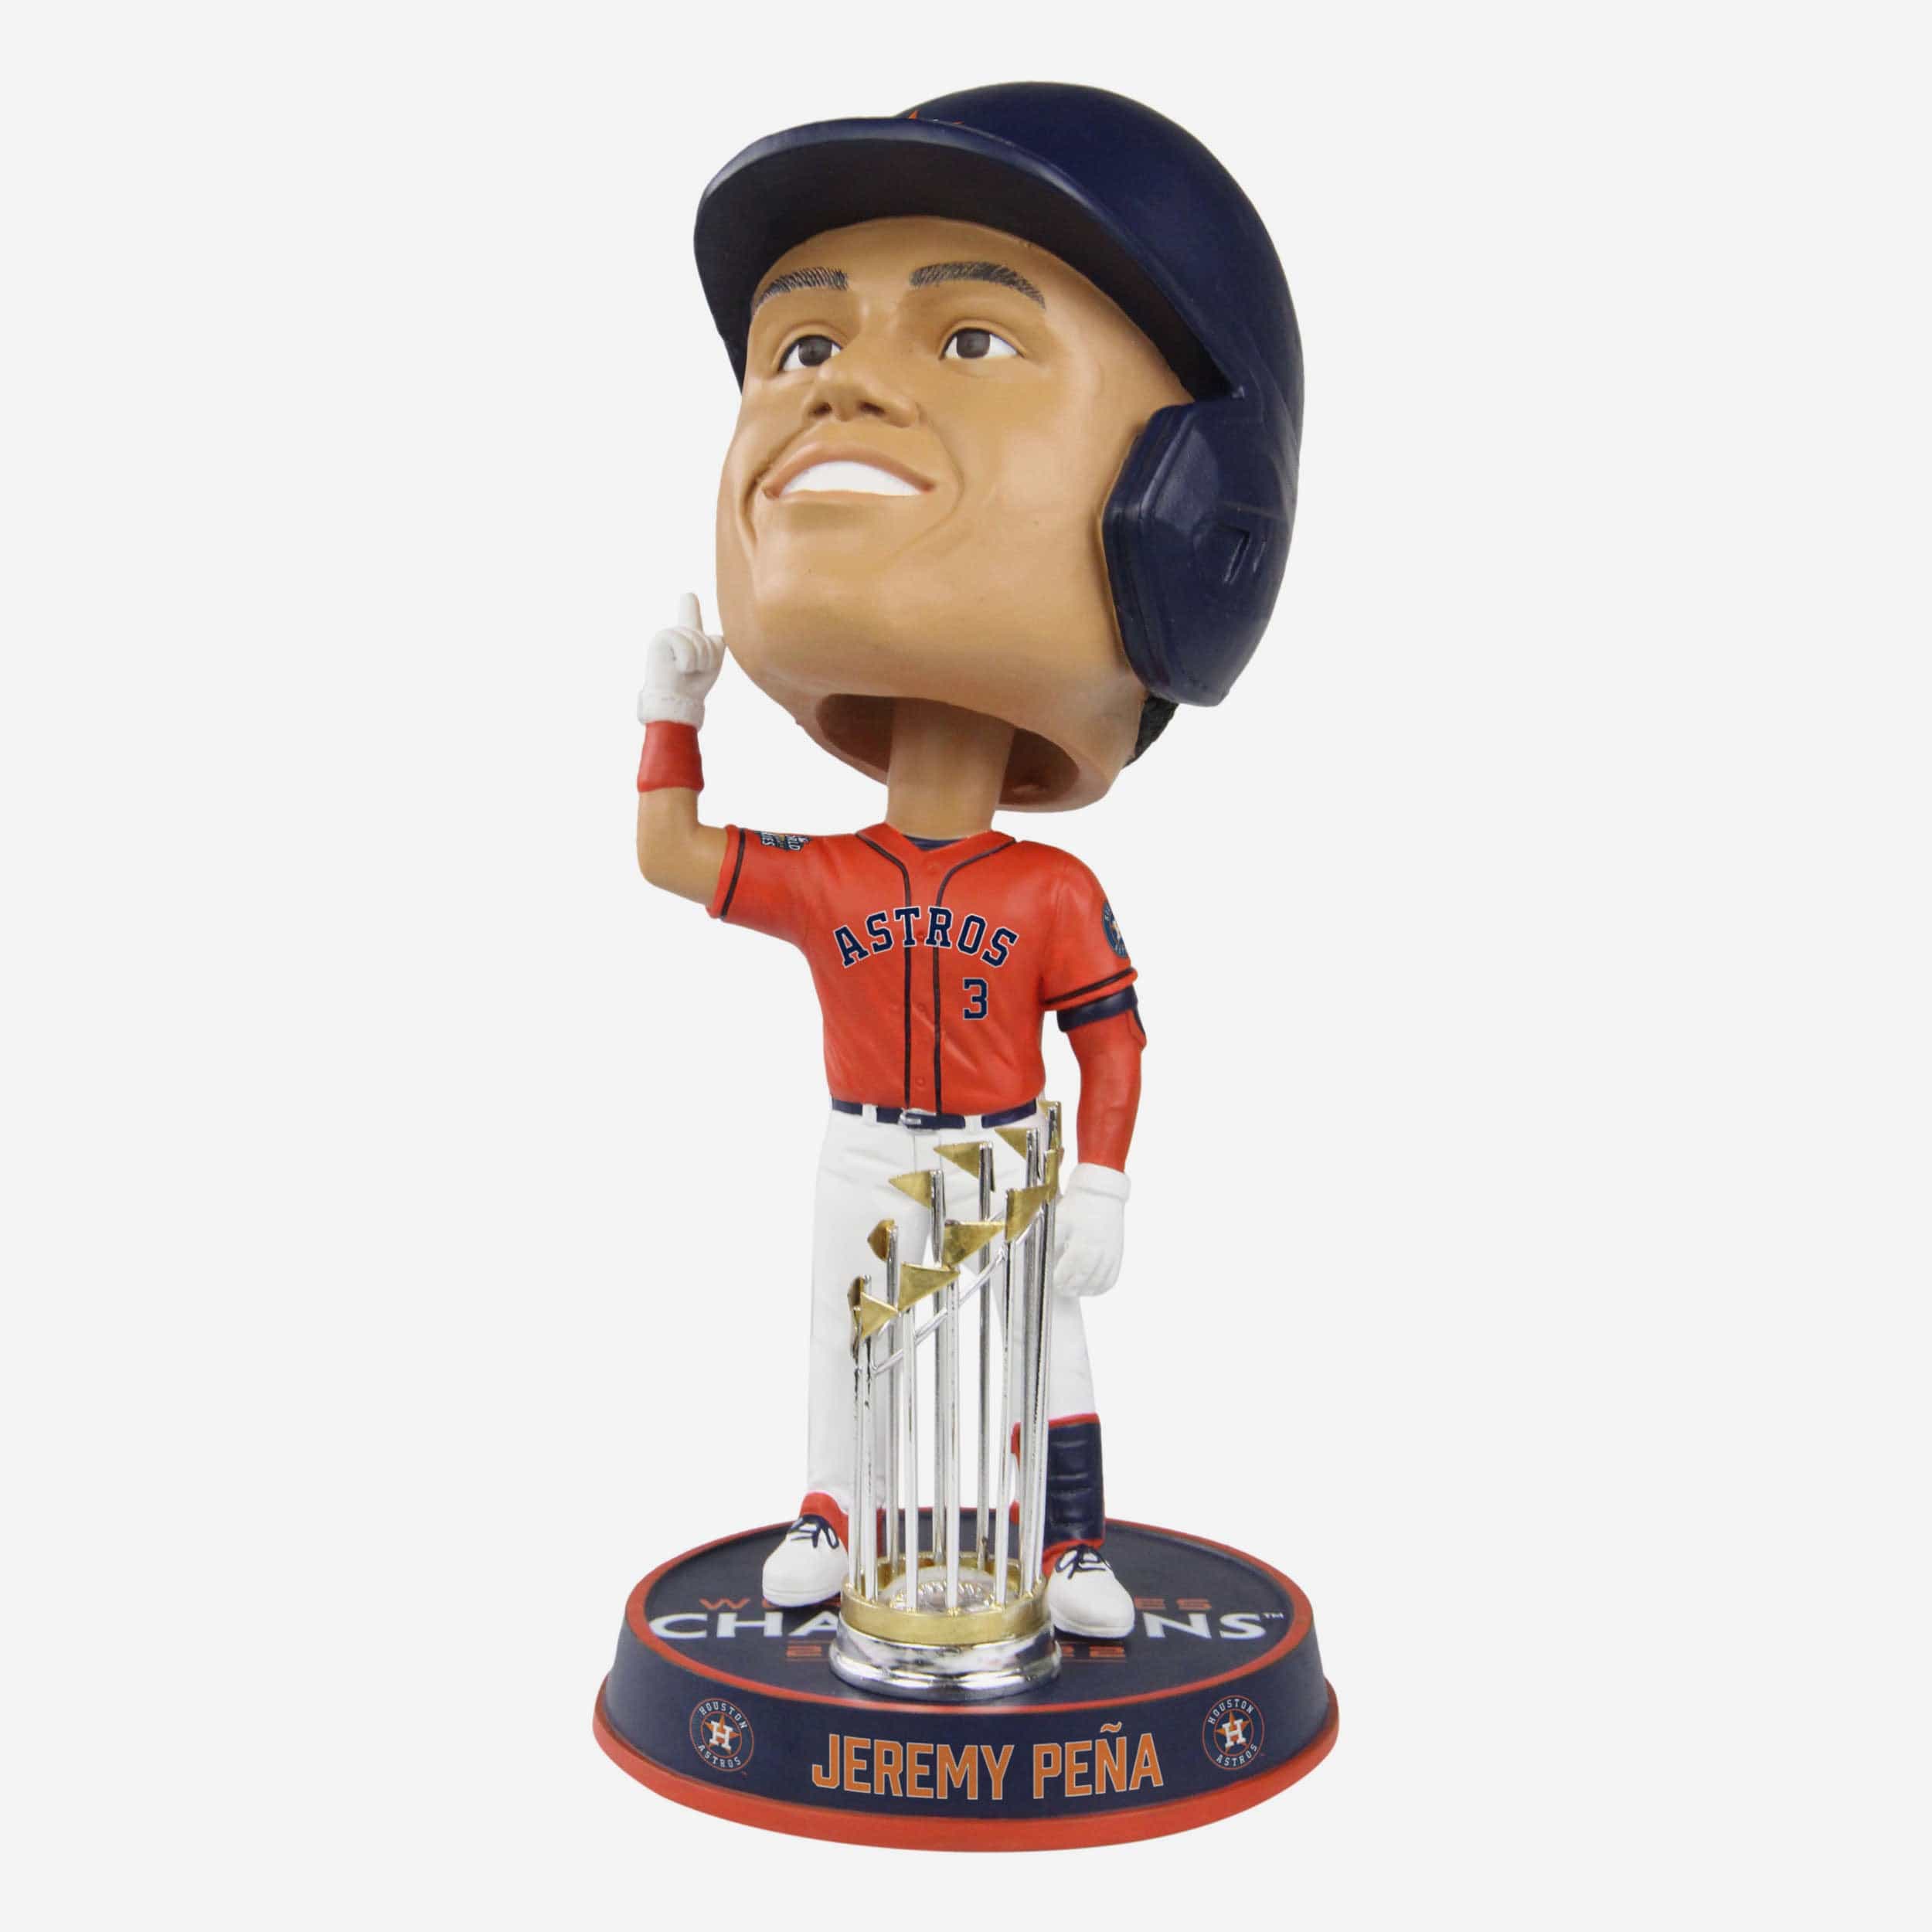 Jeremy Pena Houston Astros 2022 World Series Champions Orange Jersey Bighead Bobblehead Officially Licensed by MLB